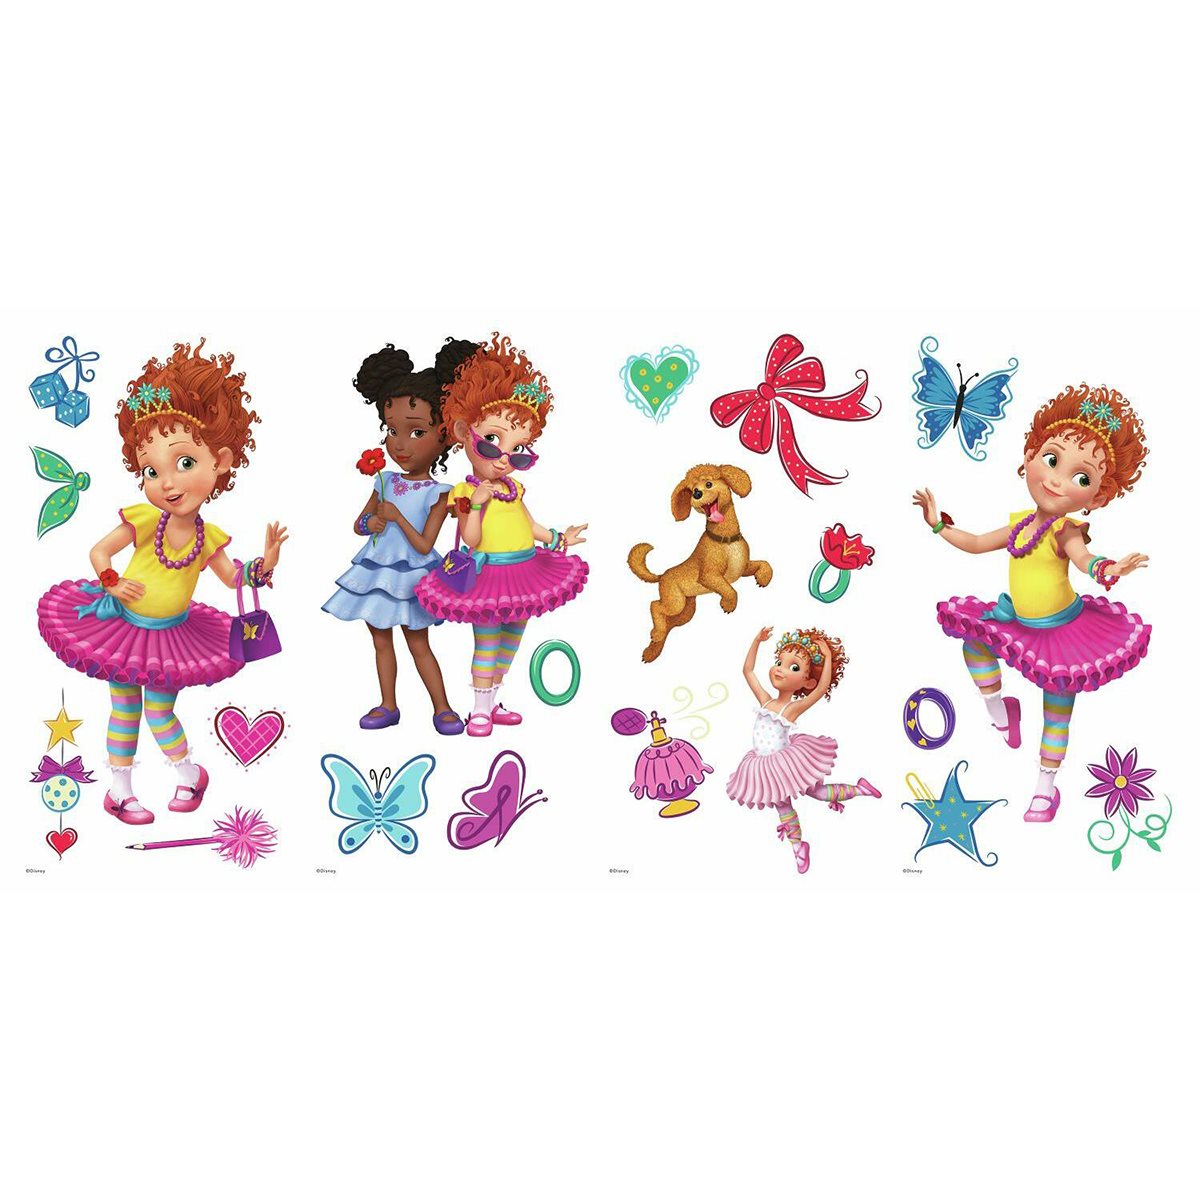 Fancy Nancy Peel and Stick Wall Decals.